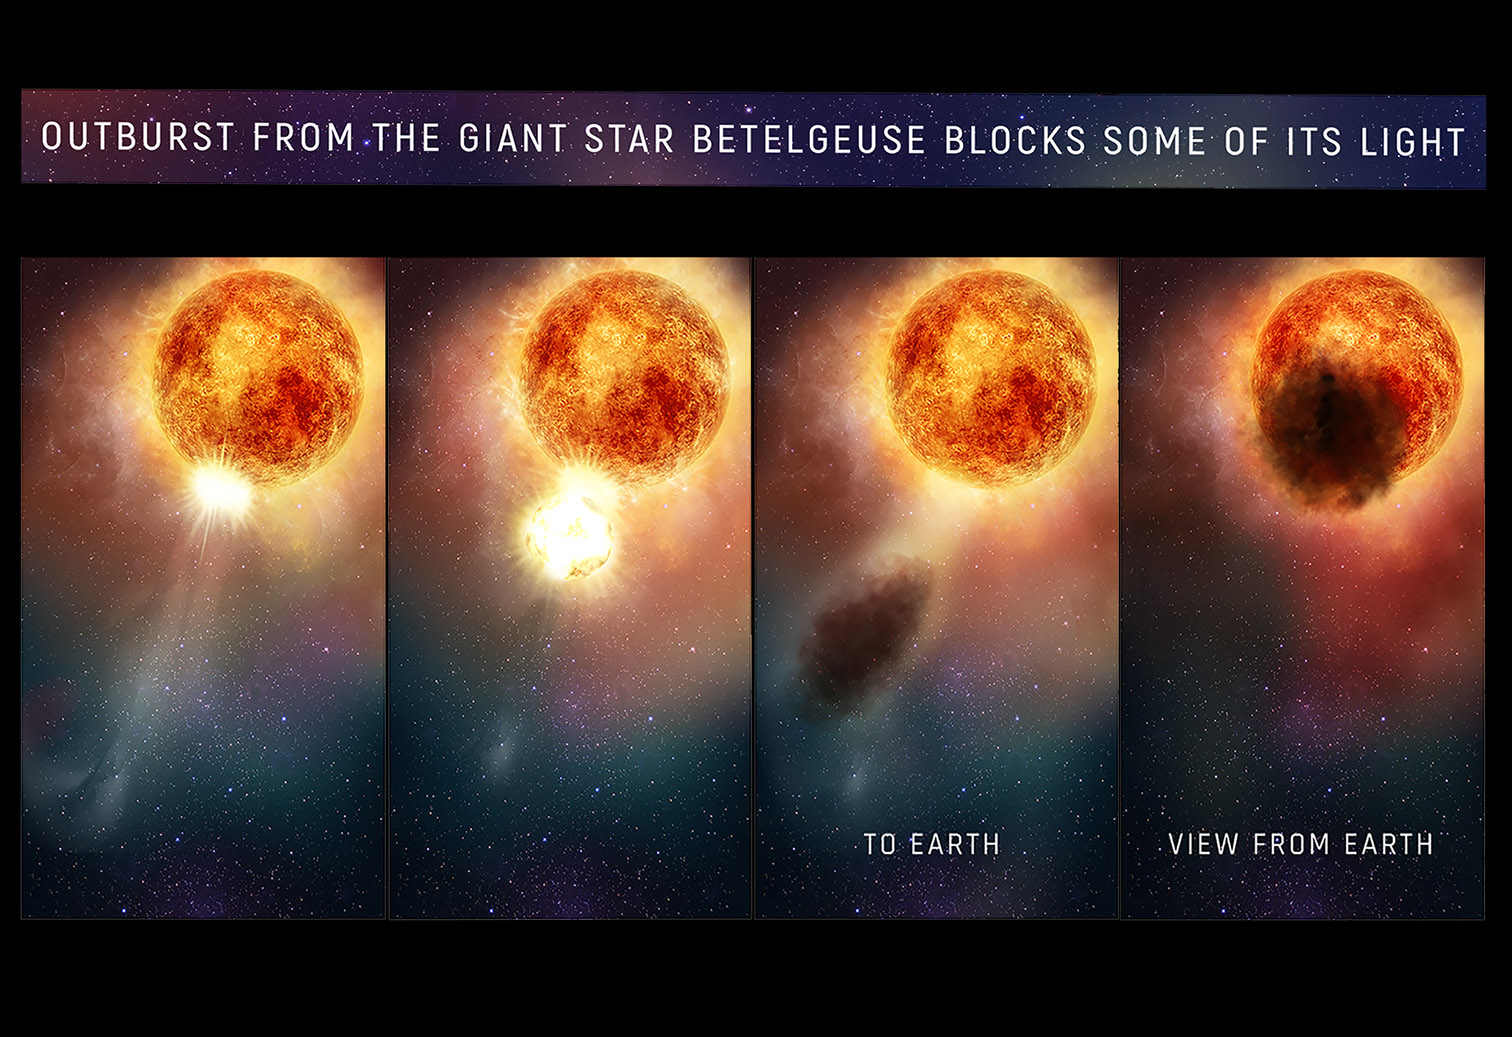 This four-panel graphic illustrates how the southern region of the rapidly evolving, bright red supergiant star Betelgeuse may have suddenly become fainter for several months during late 2019 and early 2020. In the first two panels, as seen in ultraviolet light with the Hubble Space Telescope, a bright, hot blob of plasma is ejected from the emergence of a huge convection cell on the star's surface. In panel three, the outflowing expelled gas rapidly expands outward. It cools to form an enormous cloud of obscuring dust grains. The final panel reveals the huge dust cloud blocking the light (as seen from Earth) from a quarter of the star's surface.